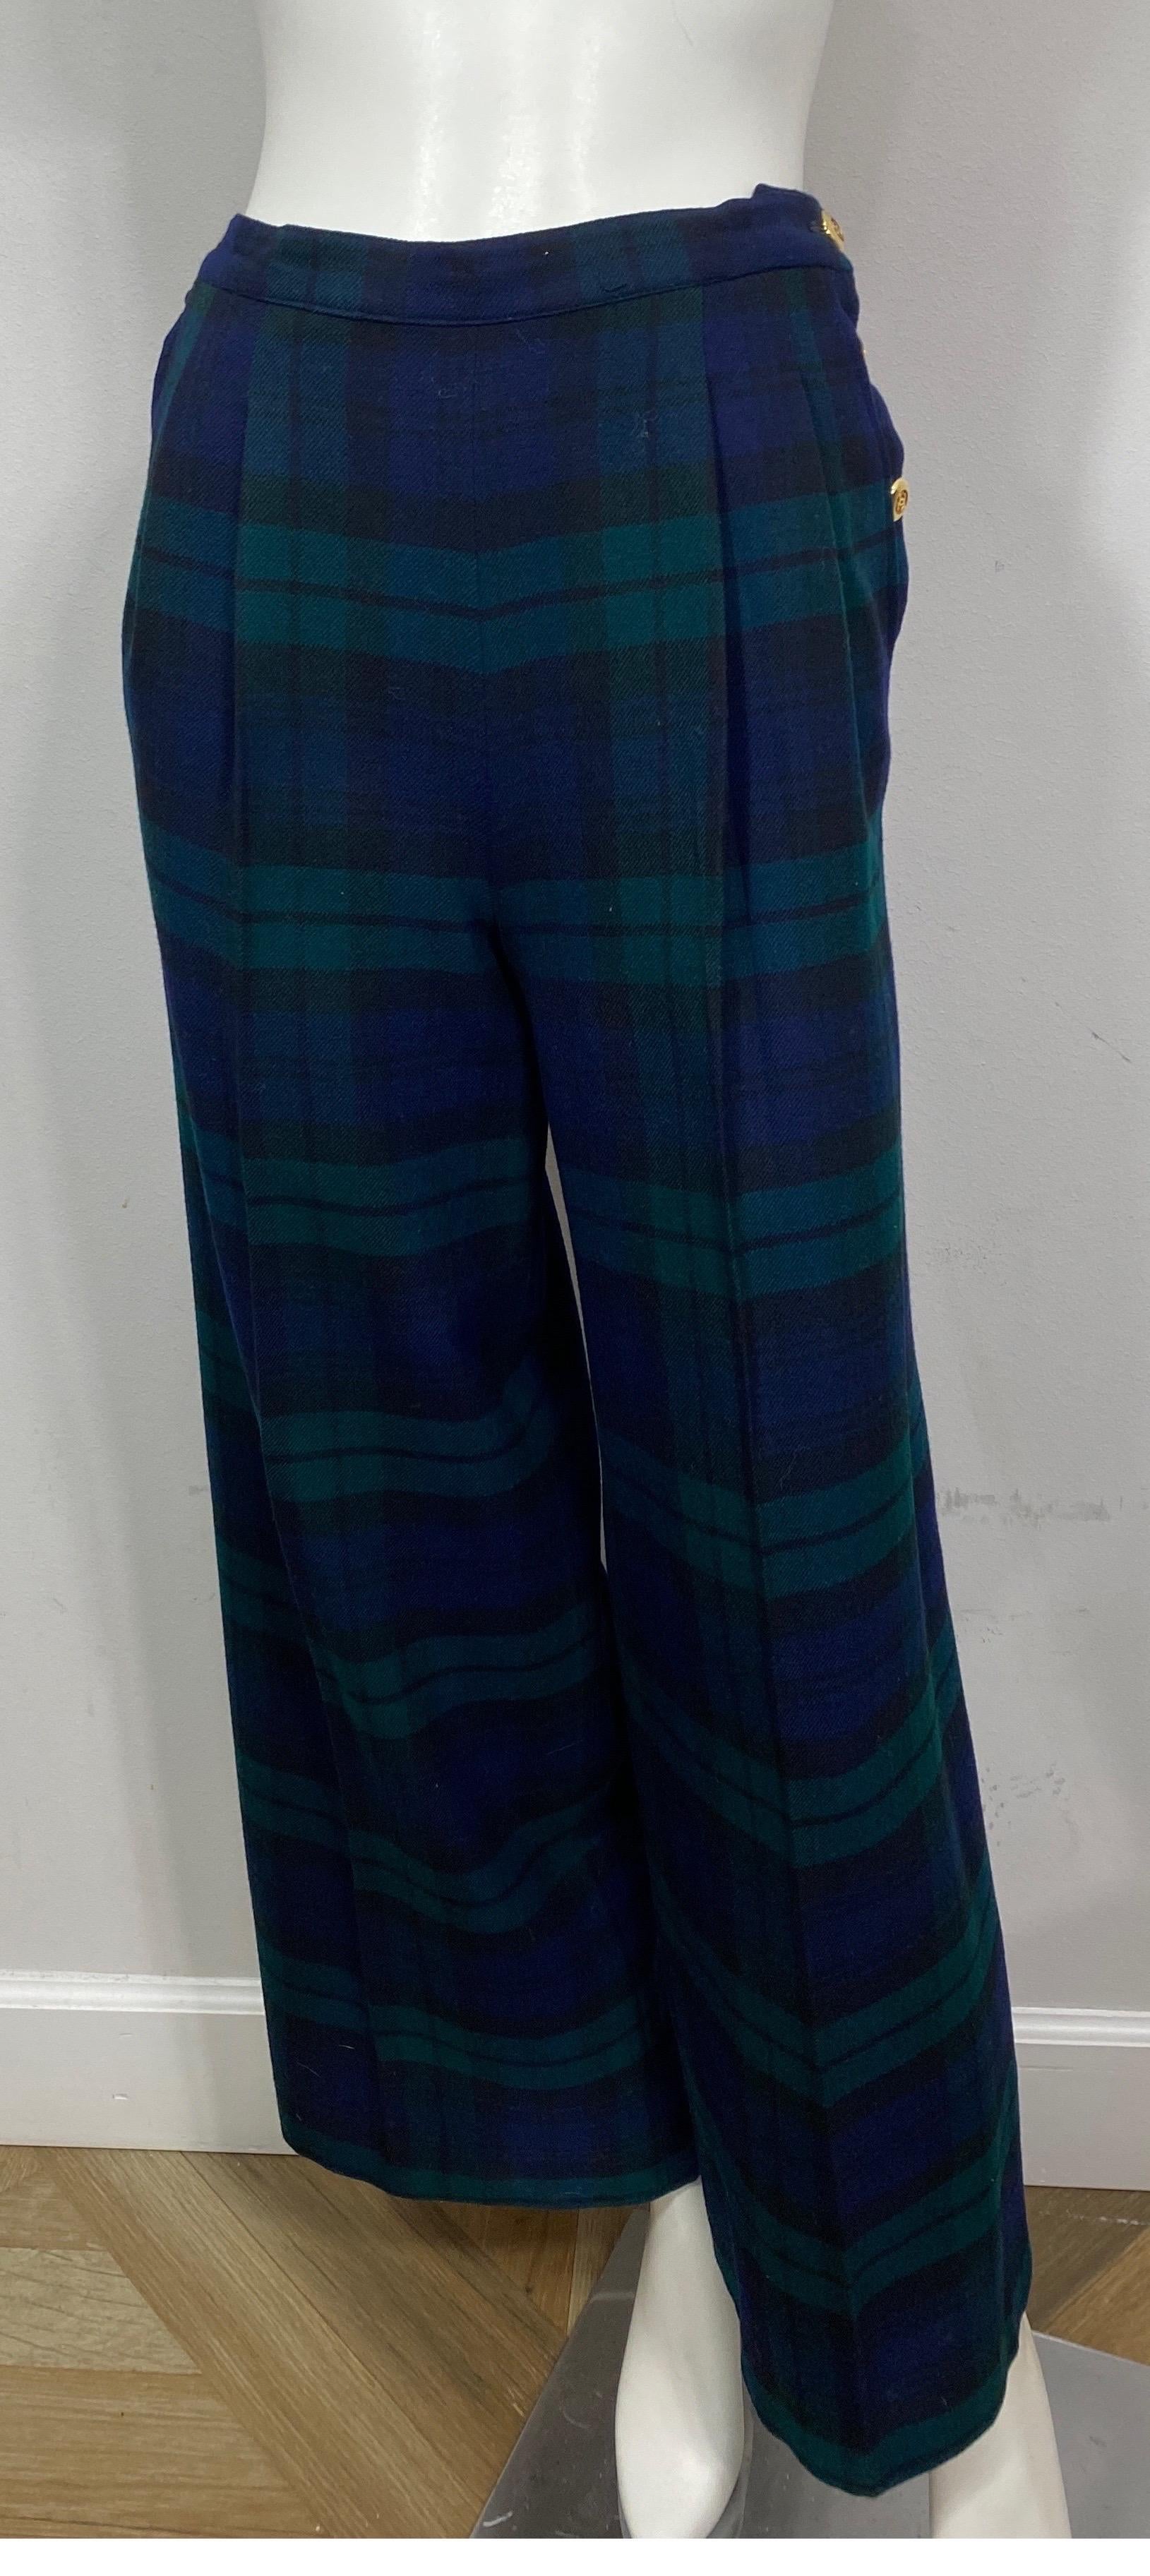 Chanel Mid 1980’s Navy and Green Plaid Double Pleated Wool Pants-Size 36 The vintage Chanel wool pants have a Season 10 code on the paper label which would make this the 10th clothing collection for Karl Lagerfeld making these part of Fall 1984/1985